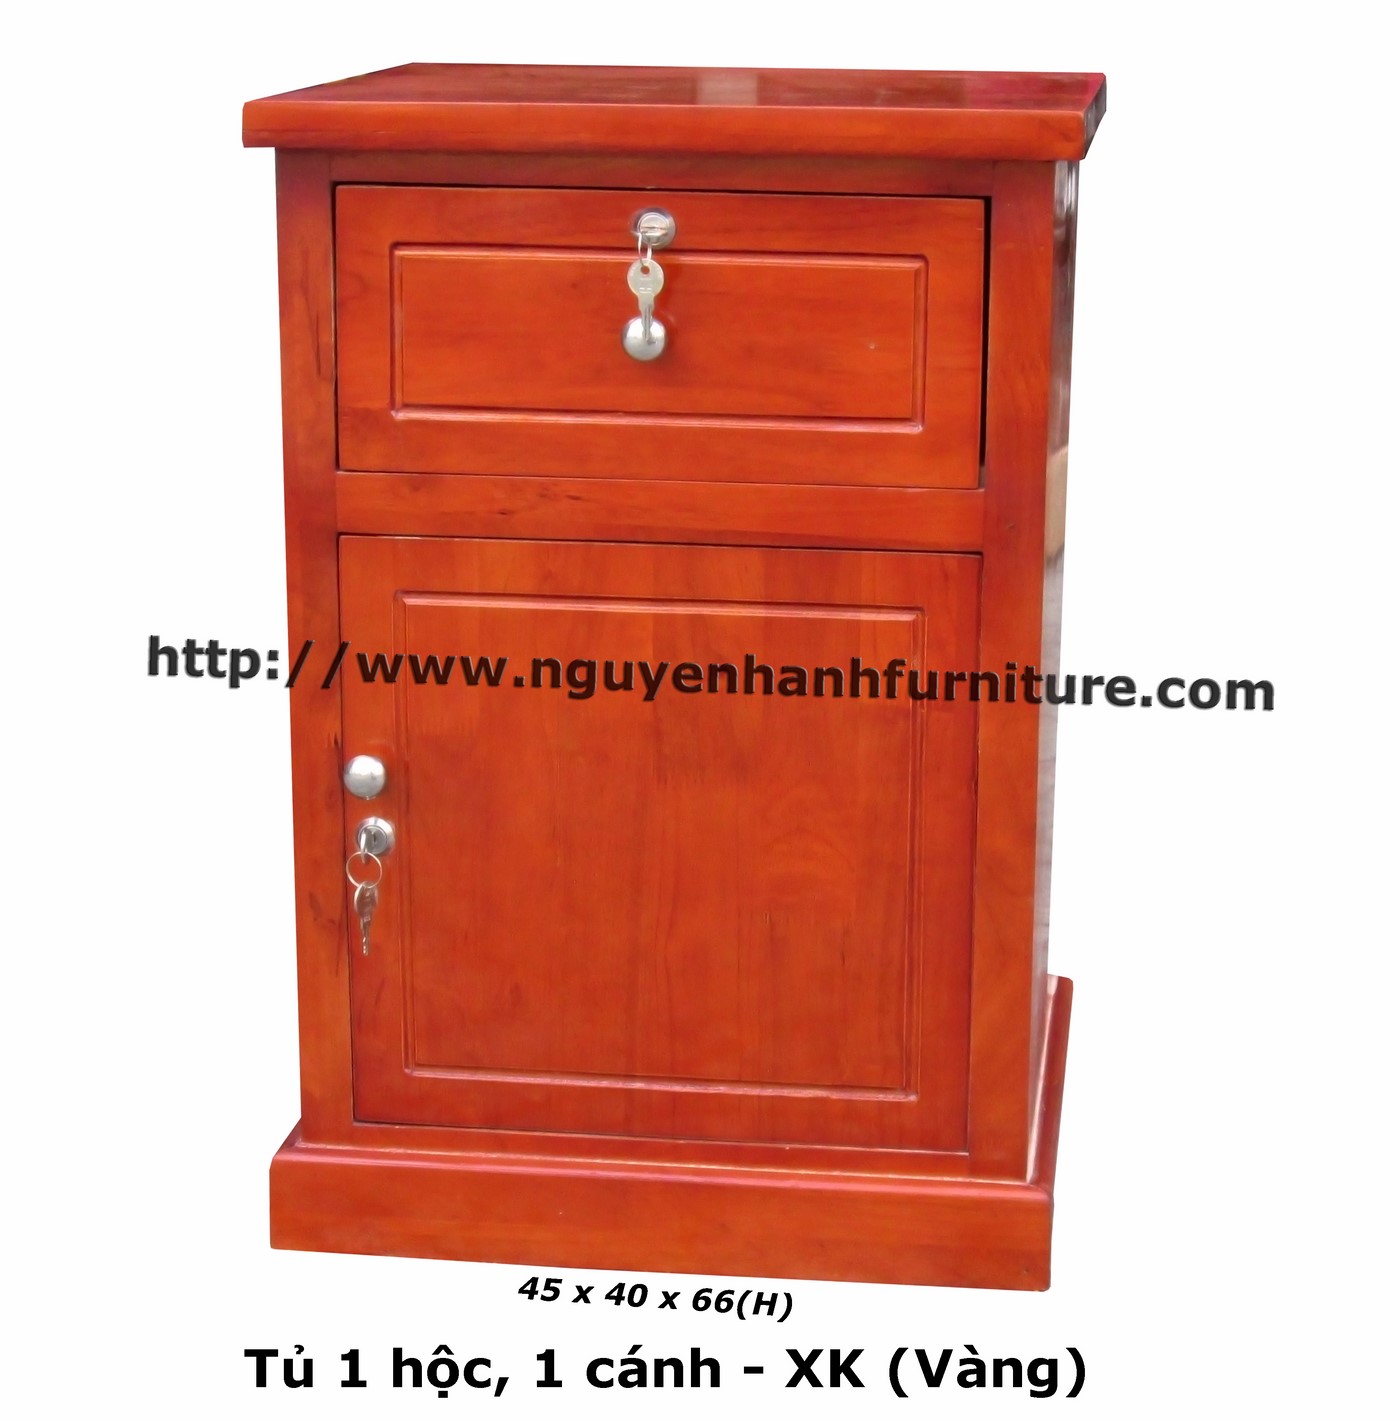 Name product: Headboard cabinet (1 drawer, 1 door) Yellow - Dimensions: 45 x 40 x 66 (H) - Description: Wood natural rubber